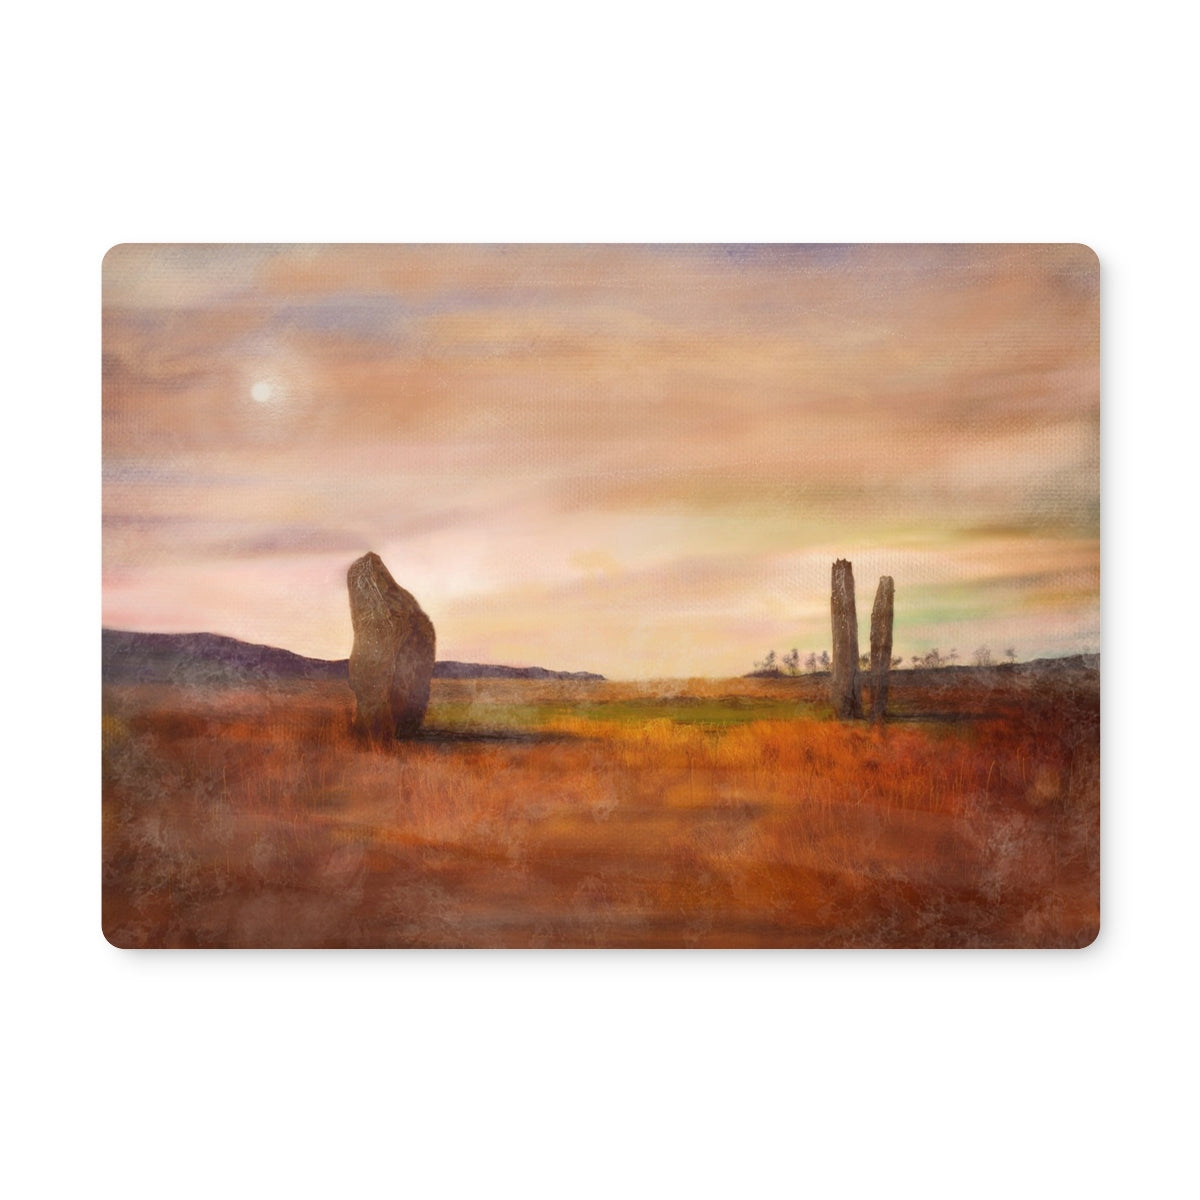 Machrie Moor Arran Art Gifts Placemat-Placemats-Arran Art Gallery-6 Placemats-Paintings, Prints, Homeware, Art Gifts From Scotland By Scottish Artist Kevin Hunter